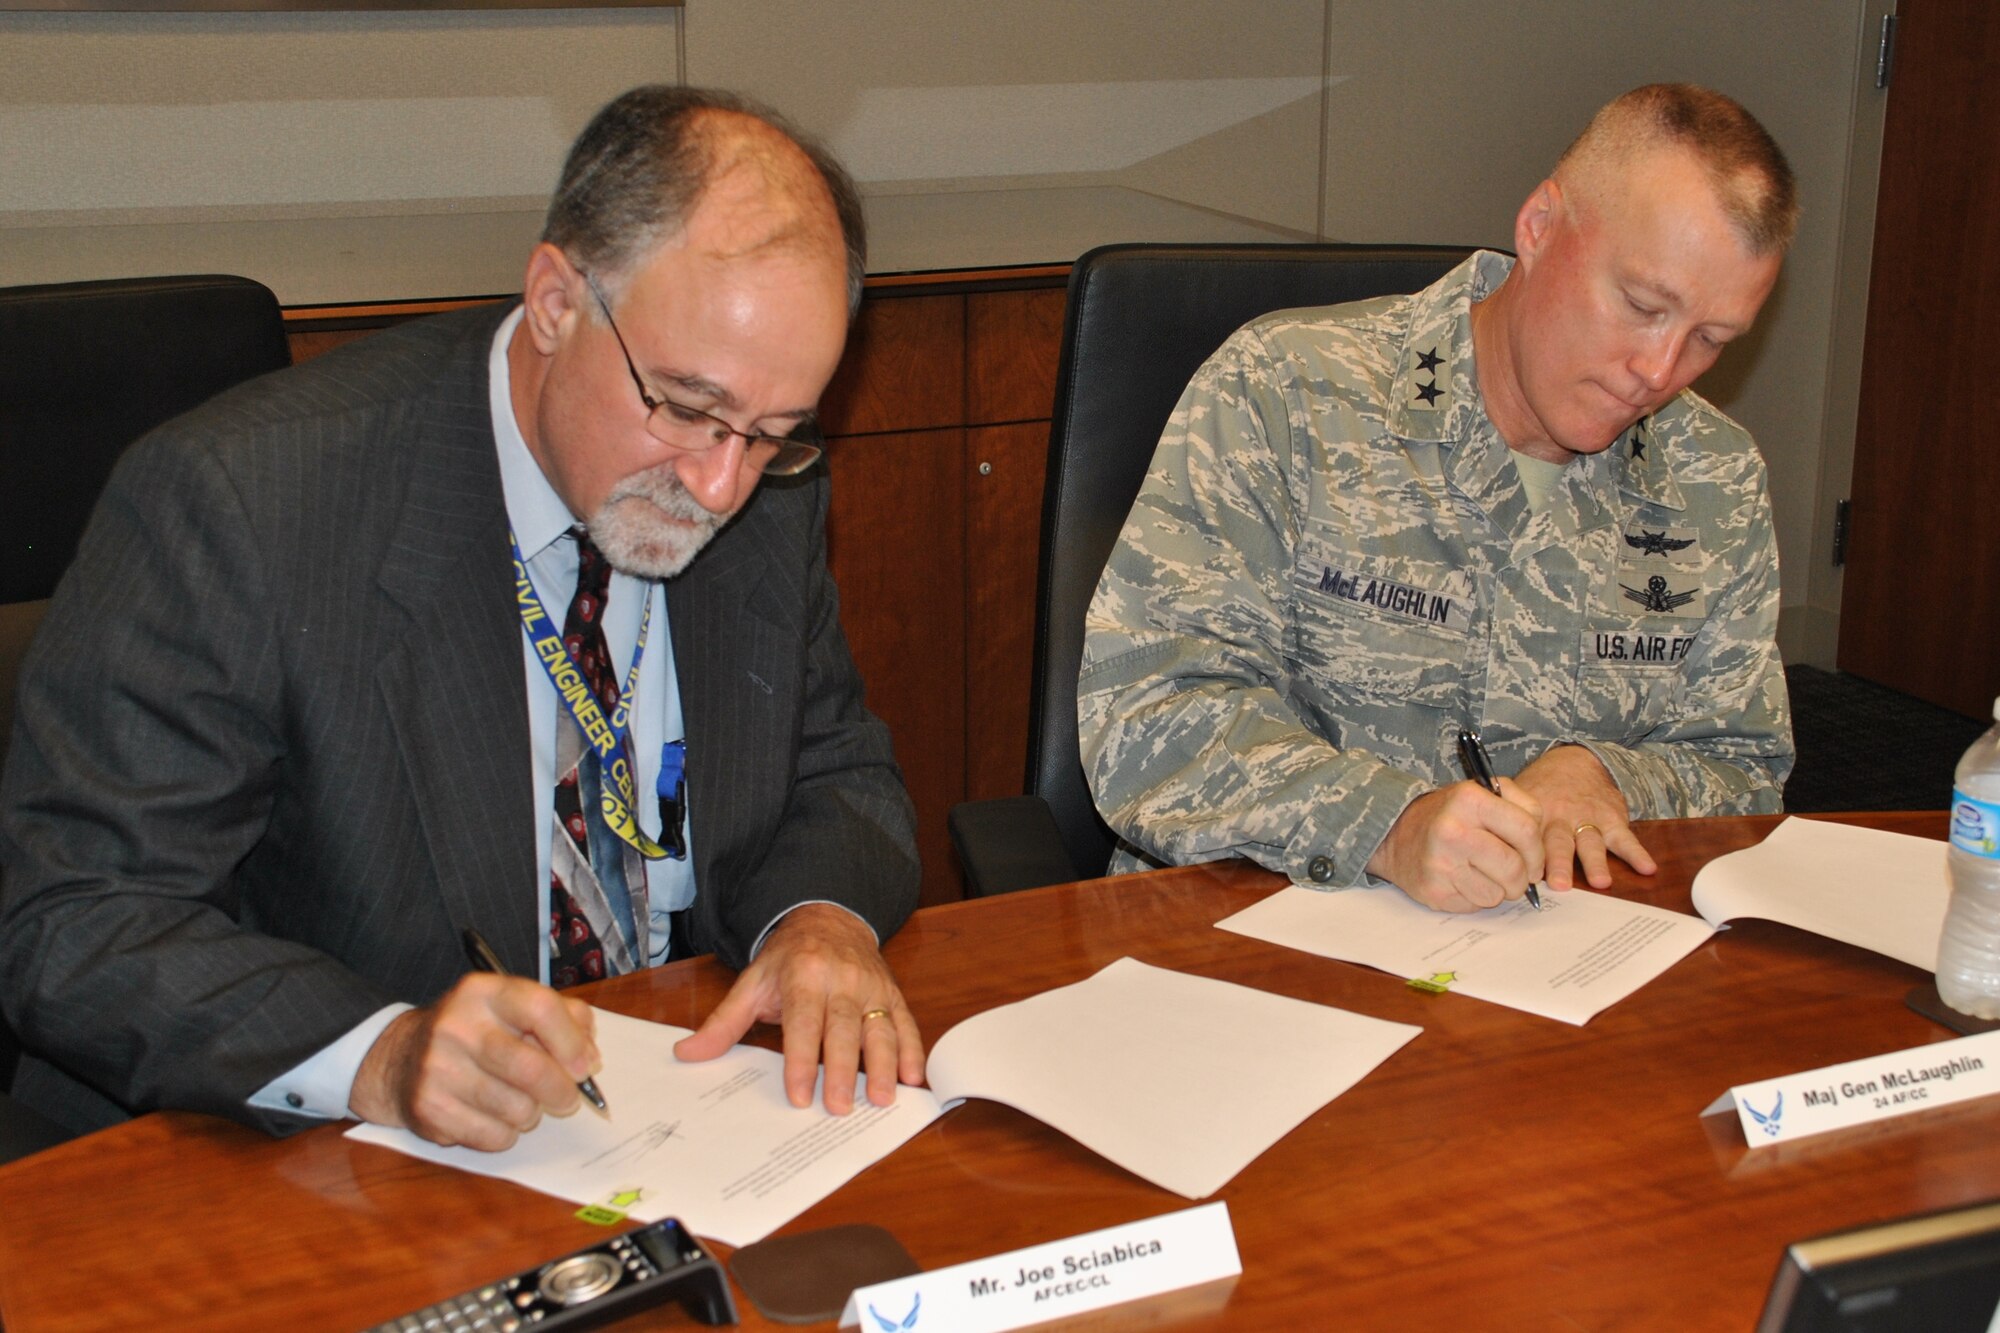 Joe Sciabica and Maj. Gen. J. Kevin McLaughlin sign the Air Force Civil Engineer Center-Air Forces Cyber nexus collaboration during a meeting June 12, 2014 at Joint Base San Antonio-Lackland, Texas. The initiative is designed to increase collaboration between the agencies in order to enhance the security of industrial control systems supporting critical Air Force infrastructures around the world. Sciabica is the AFCEC director and McLaughlin is the 24th Air Force and AFCYBER commander. (U.S. Air Force photo/Shannon Carabajal)